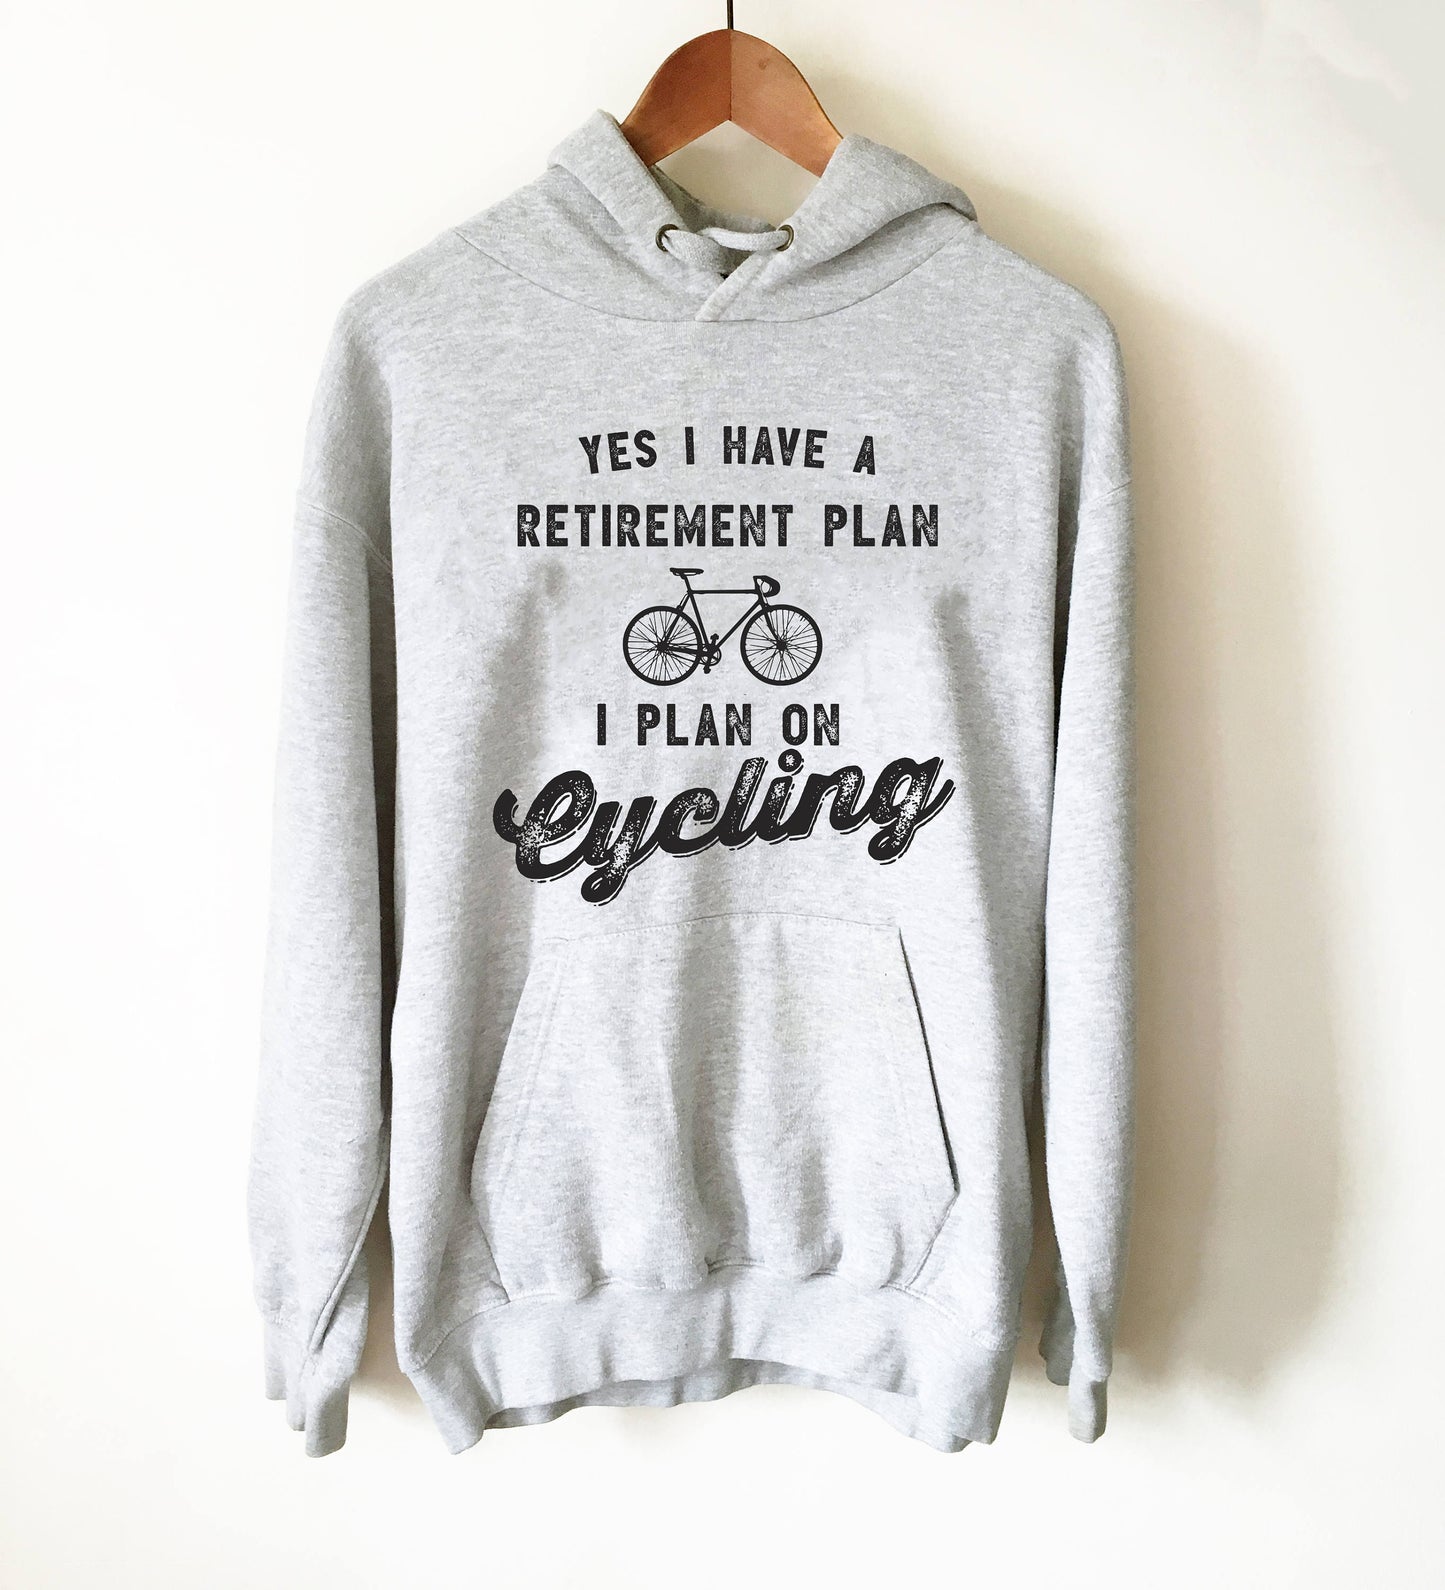 Yes I Have A Retirement Plan I Plan On Cycling Hoodie - Cycling Hoodie, Bicycle Shirt, Bicycle Tshirt, Bicycle Lover Gift, Cycling Shirt